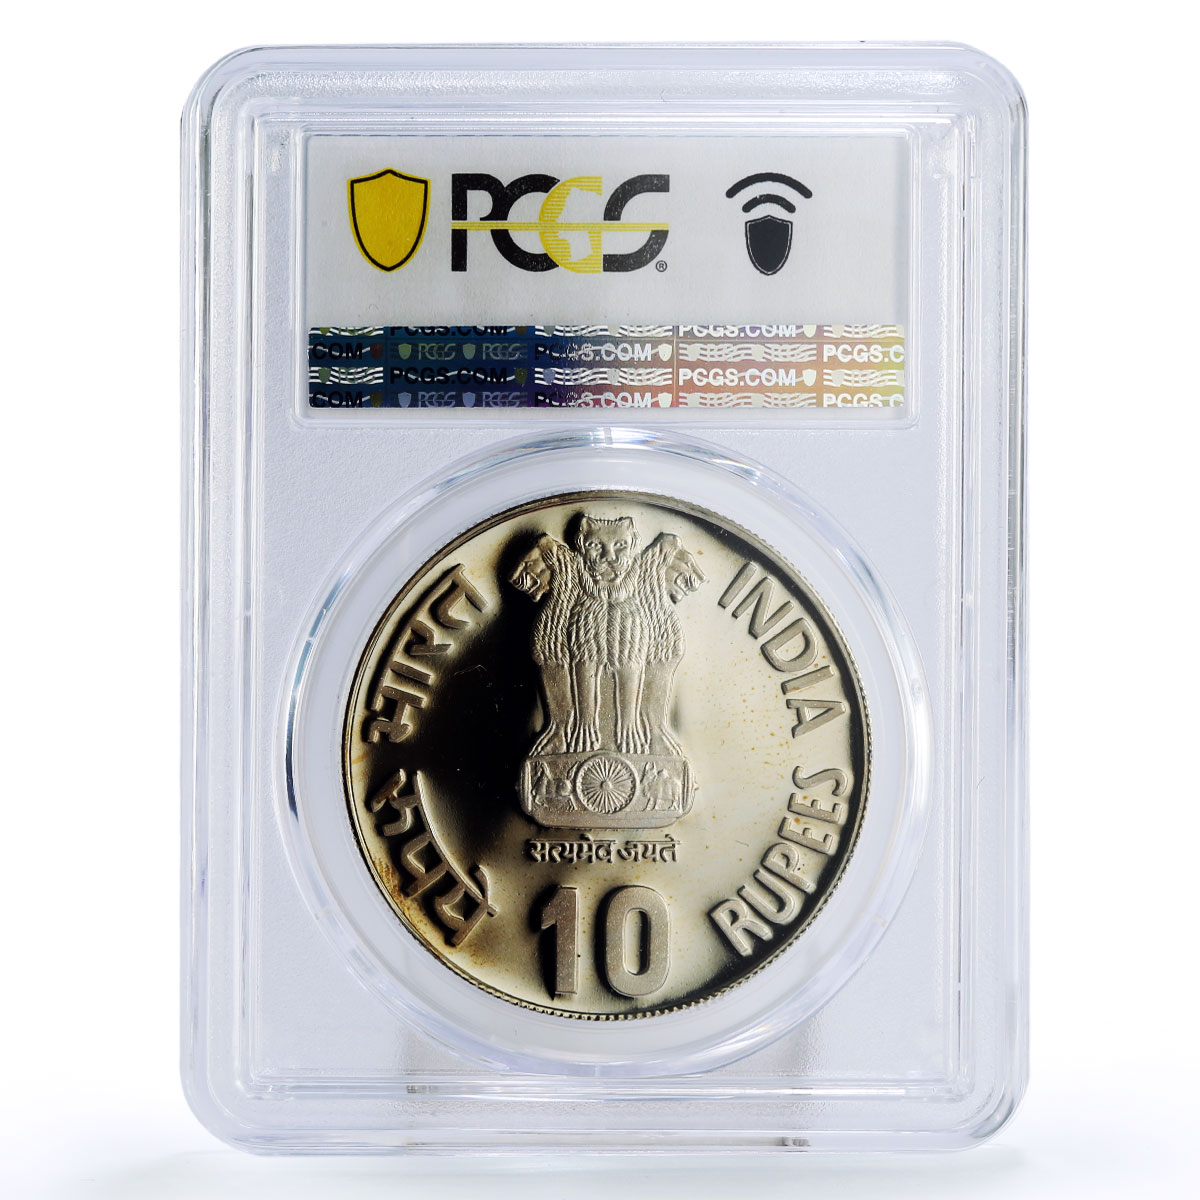 India 10 rupees Federal Bank Palm Tree Tiger Fauna PR68 PCGS CuNi coin 1985